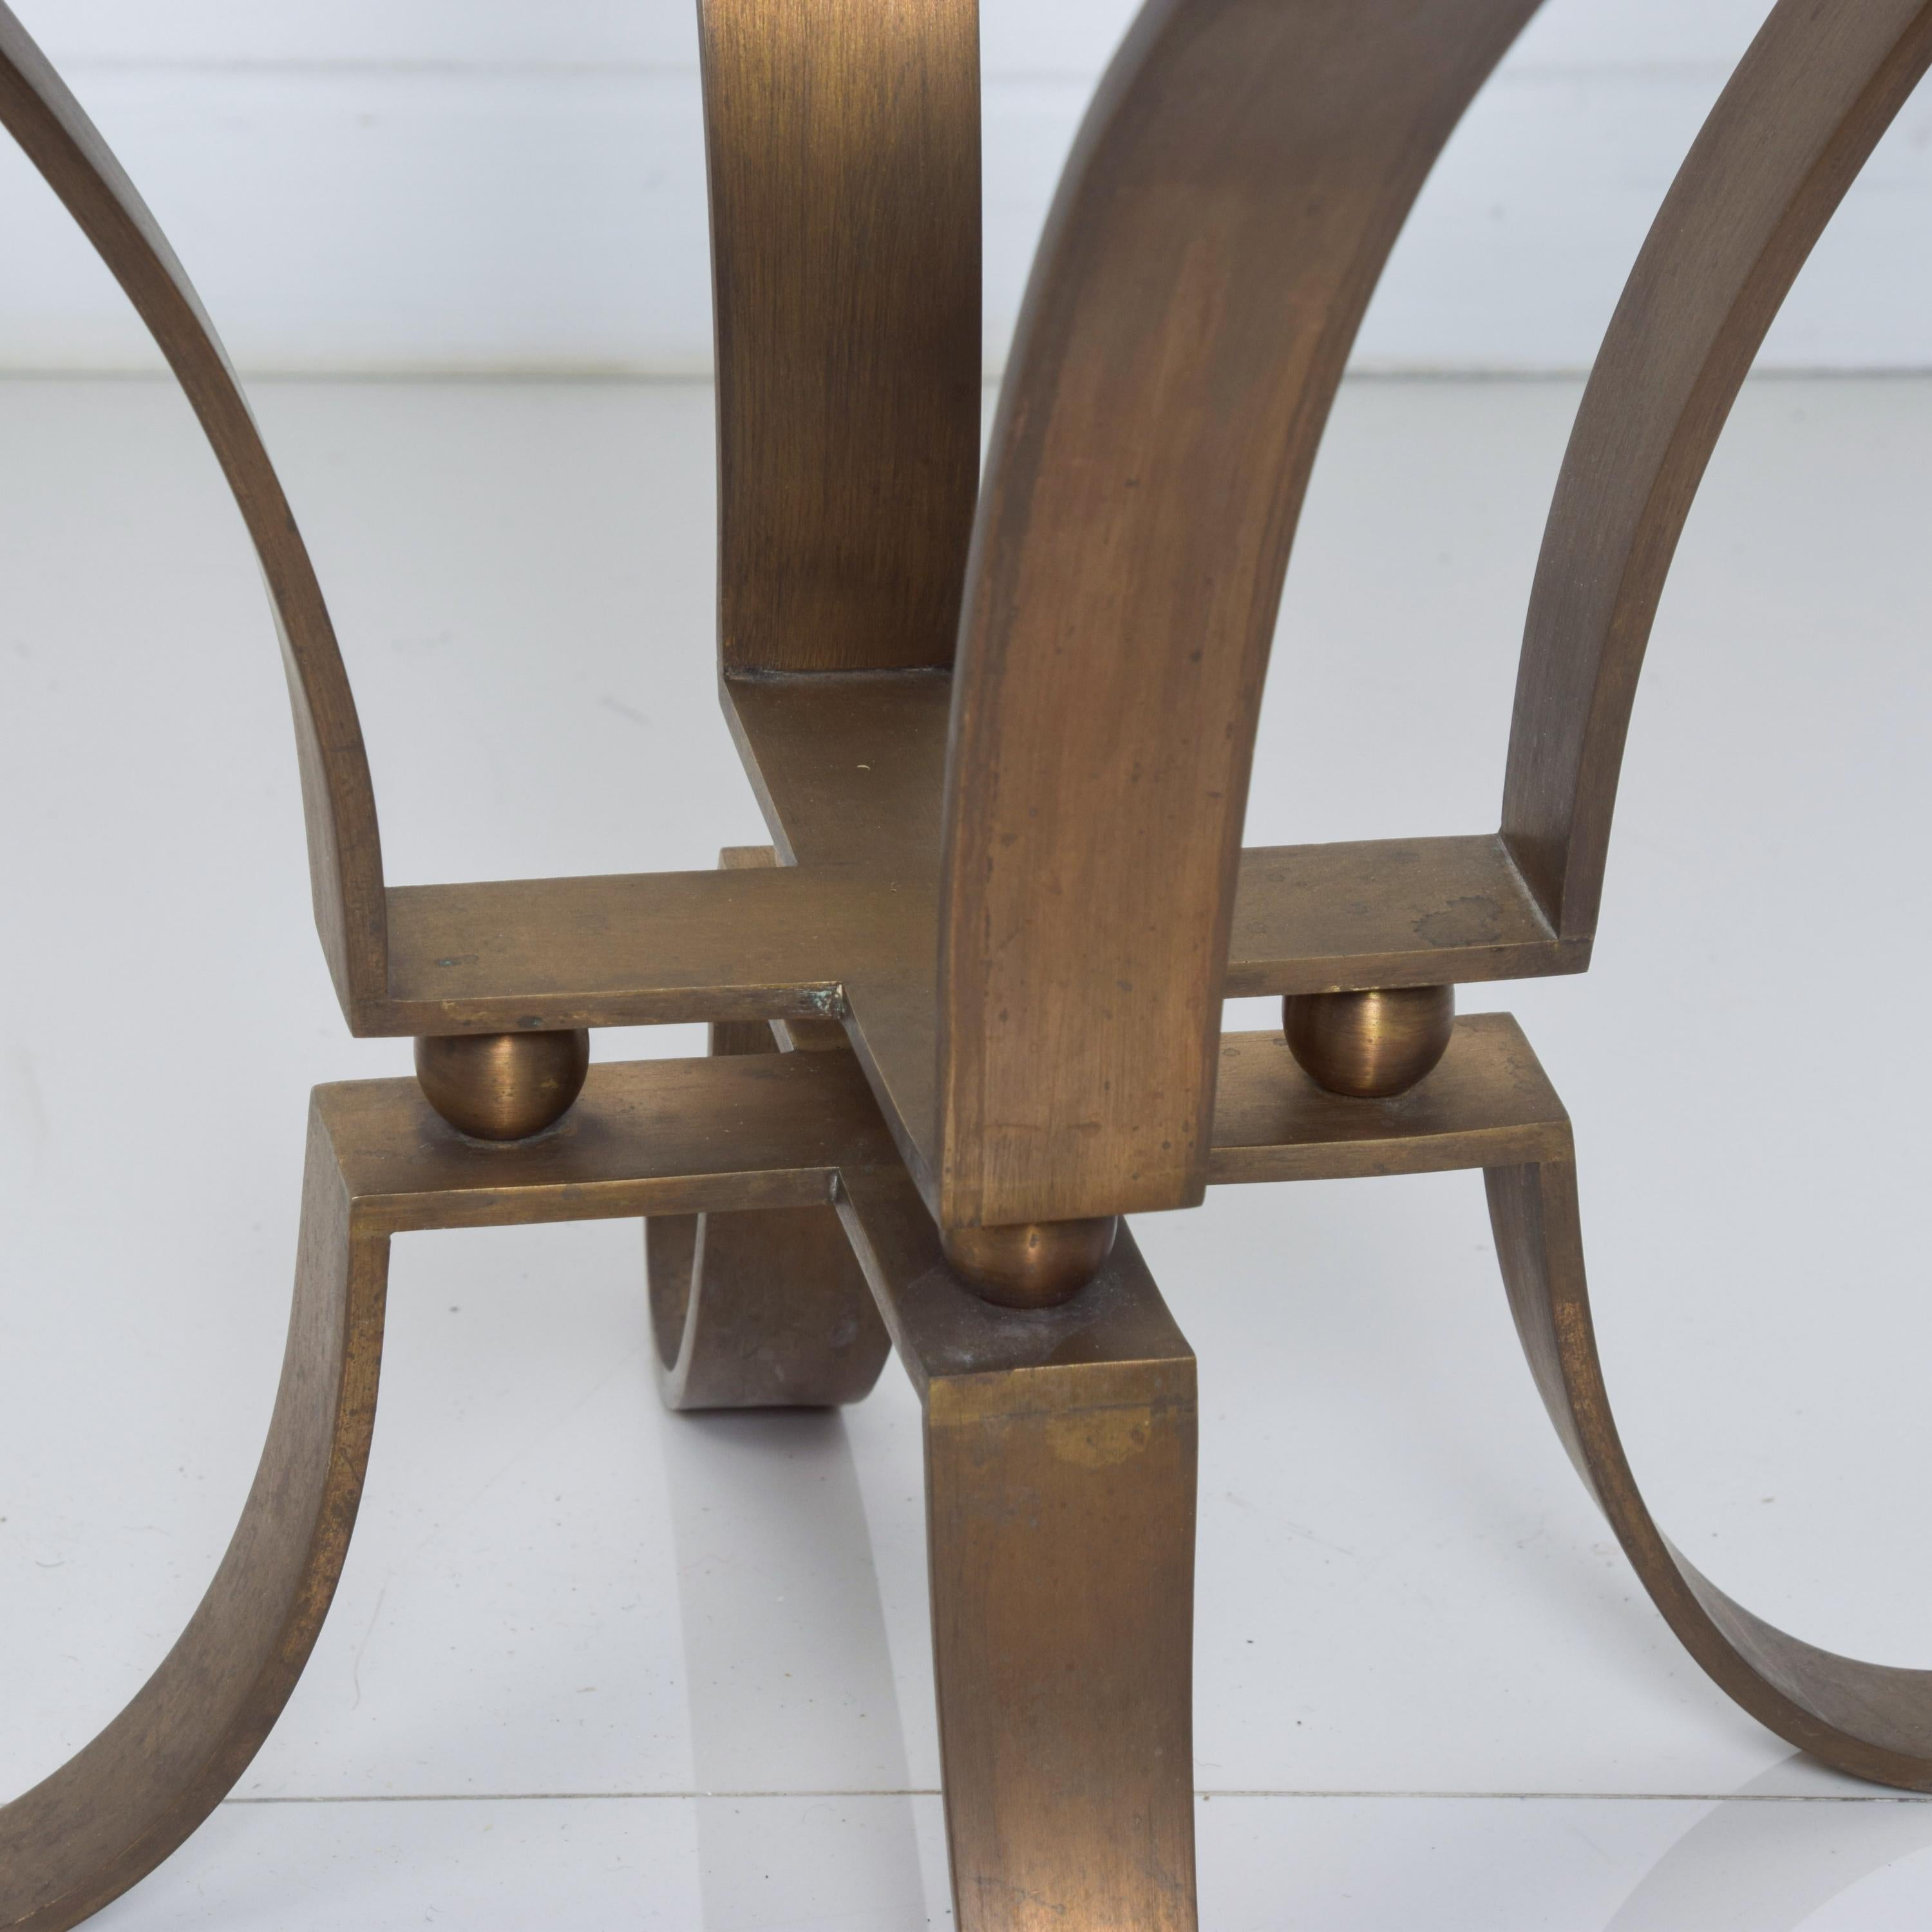 Mid-Century Modern Arturo Pani Graceful Sculptural Side Table in Bronze Midcentury Mexico 1950s